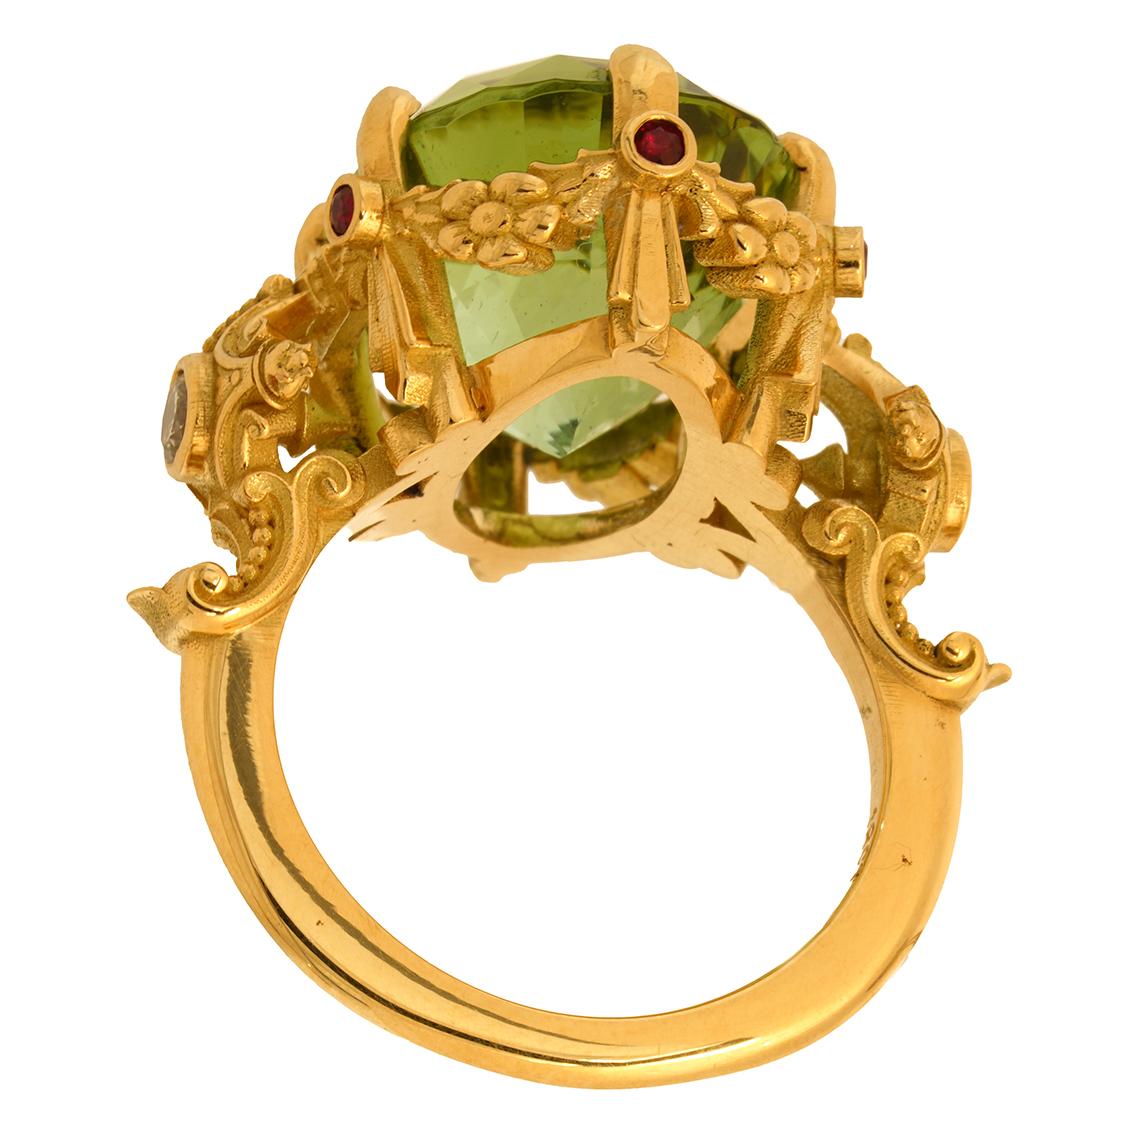 Victorian 21ct Green Tourmaline, Rubies, Diamonds, & 18k Yellow Gold Antique Style Ring For Sale